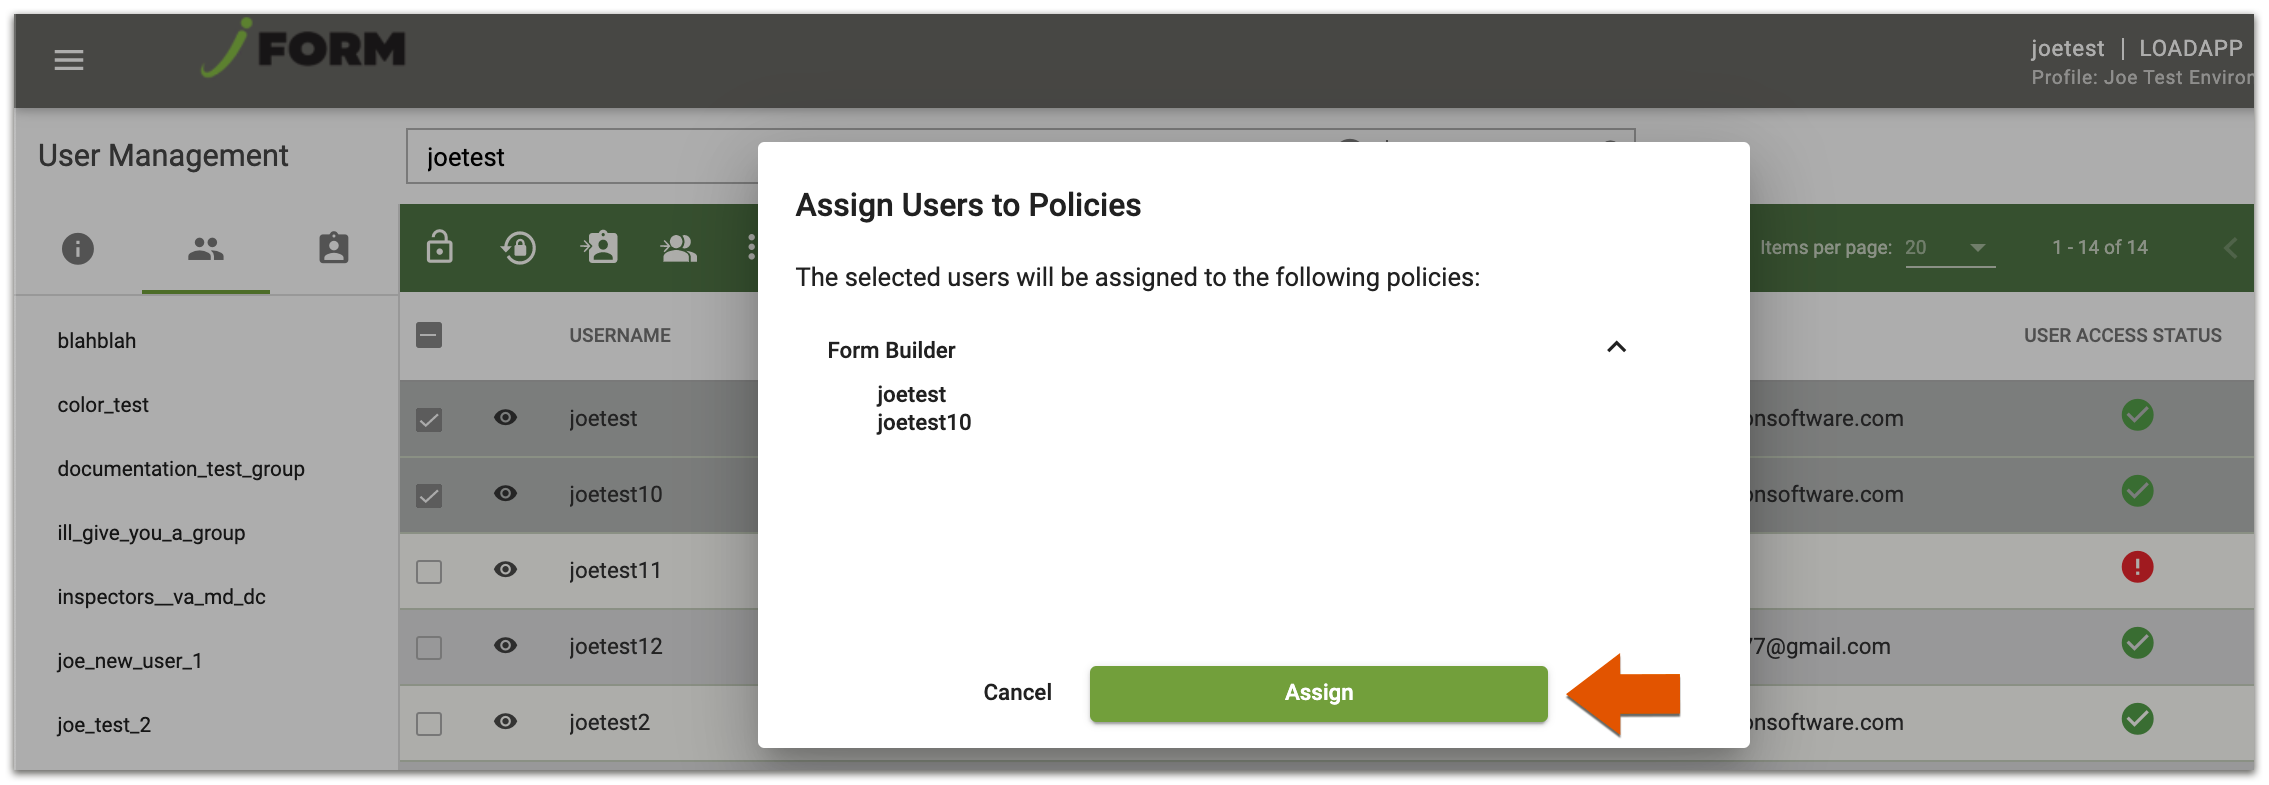 Assign_Policy_Step_4.png